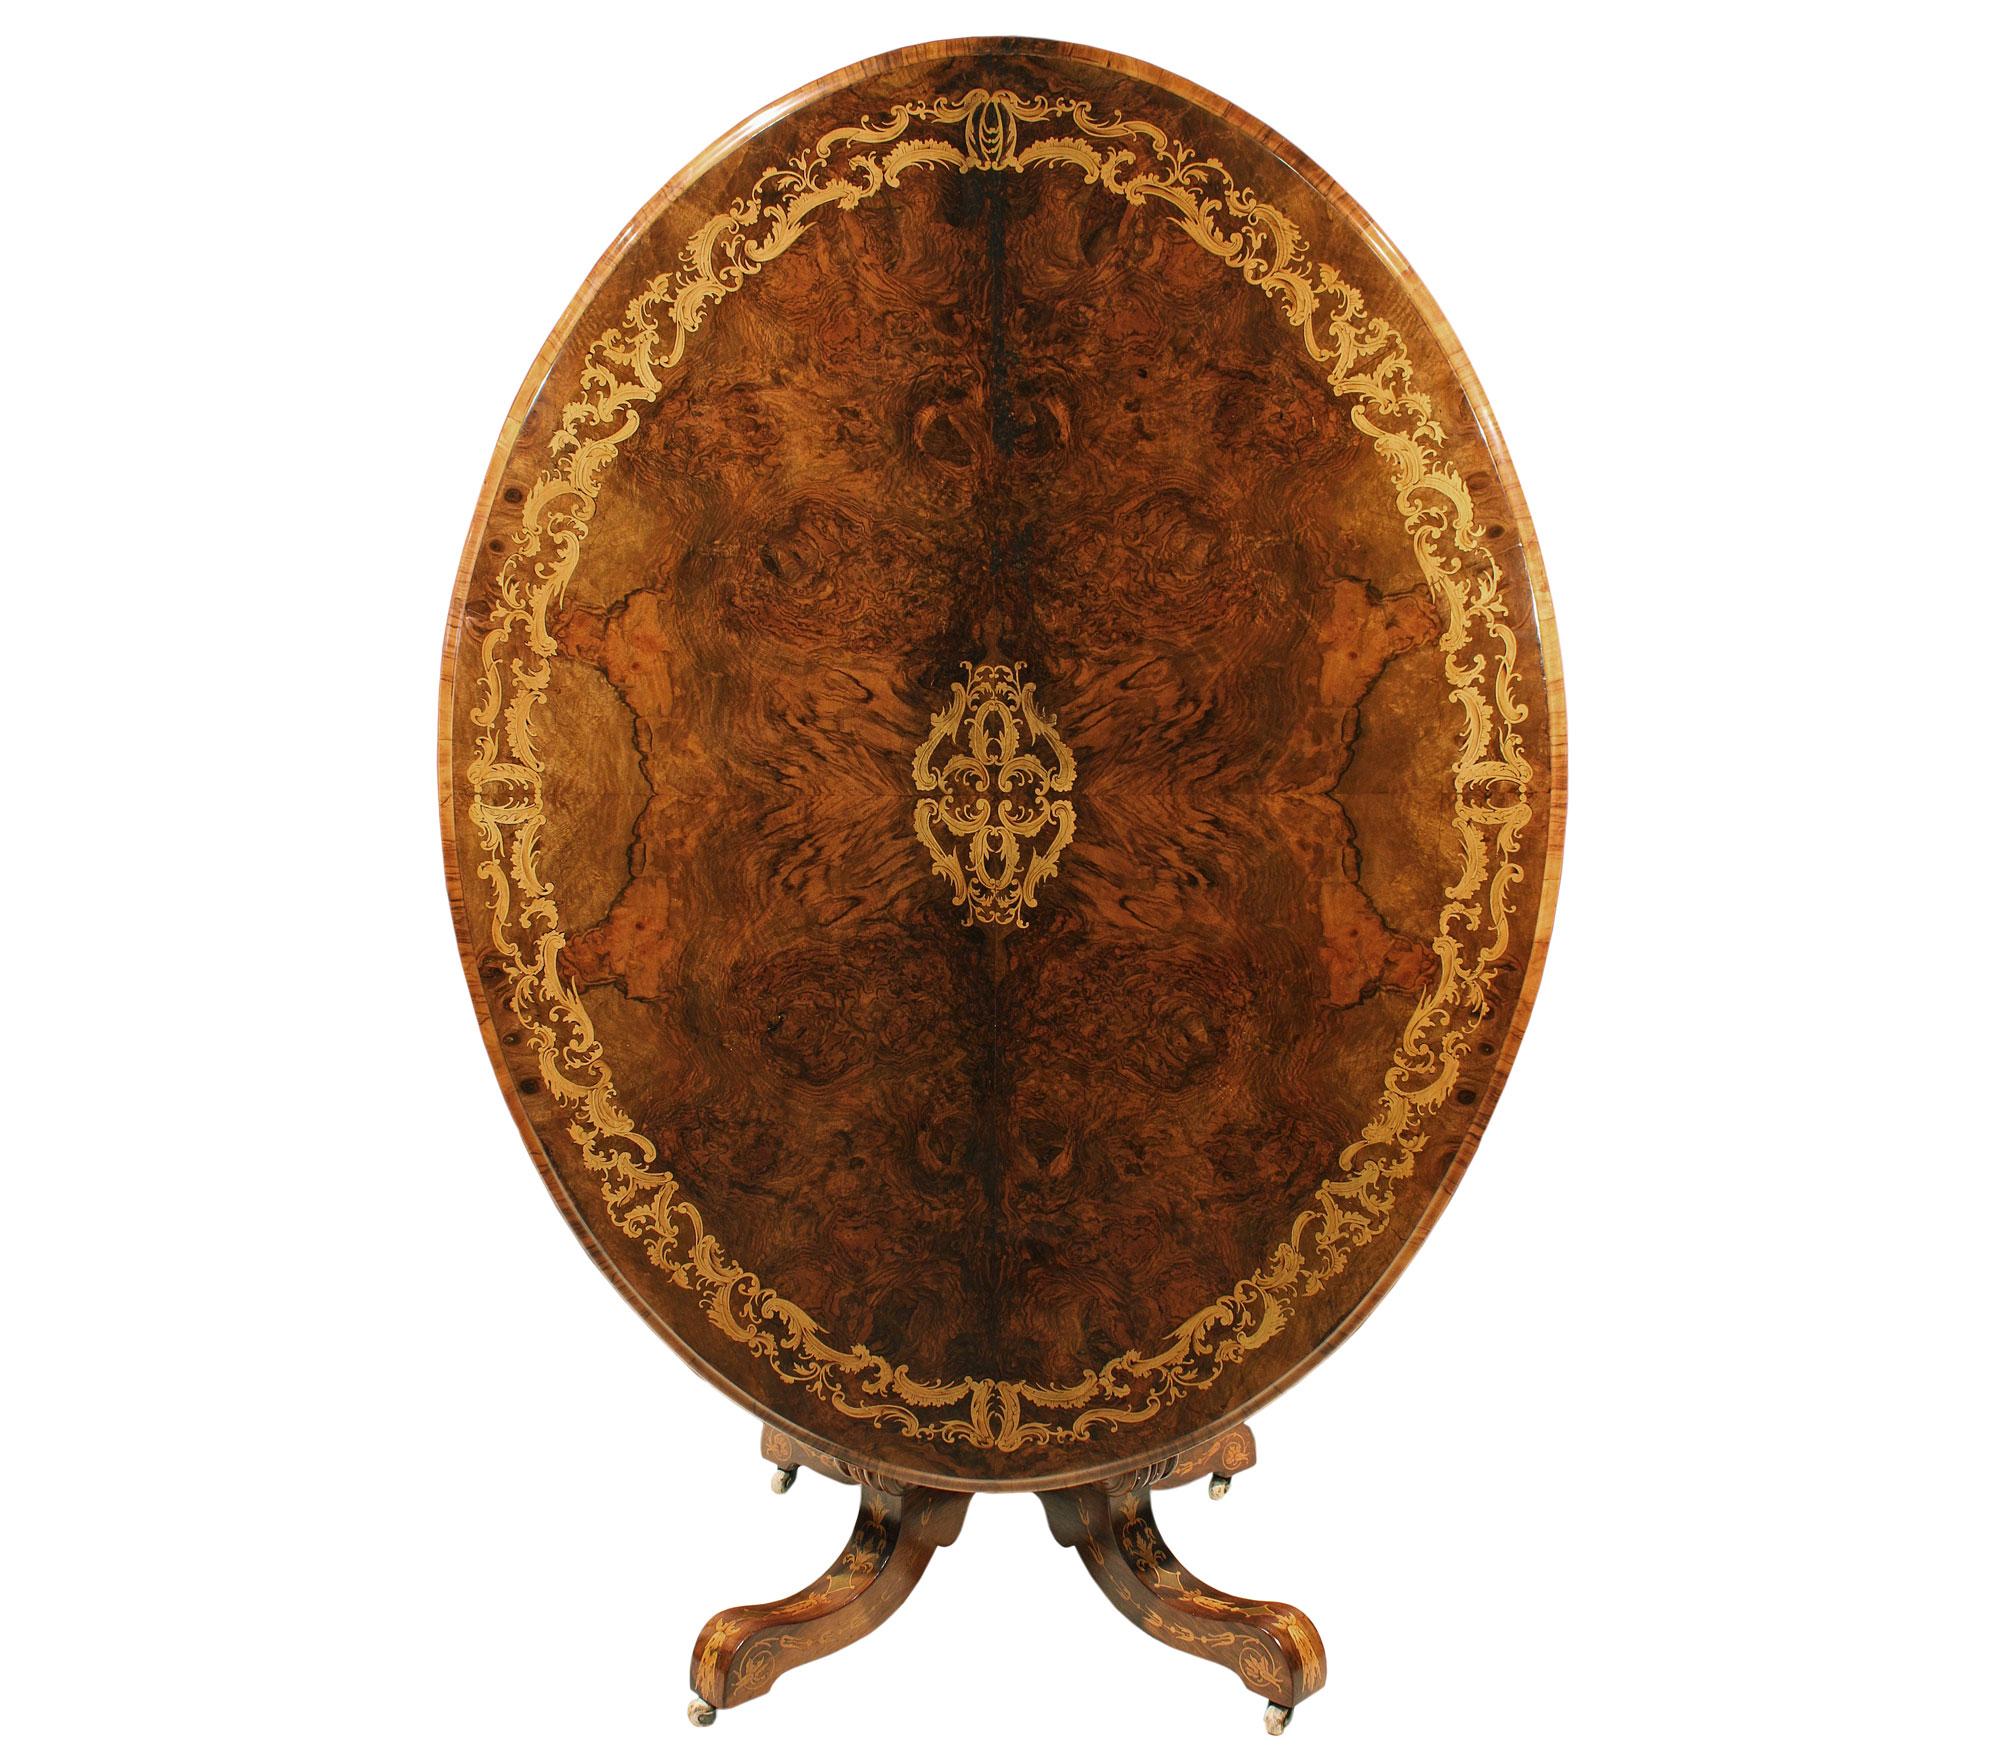 A very decorative and large scale English 19th century oval tilt top center table in various walnuts and exotic woods. The table is raised by the original porcelain casters with four C scrolled supports joined by a richly inlaid bottom tier. The